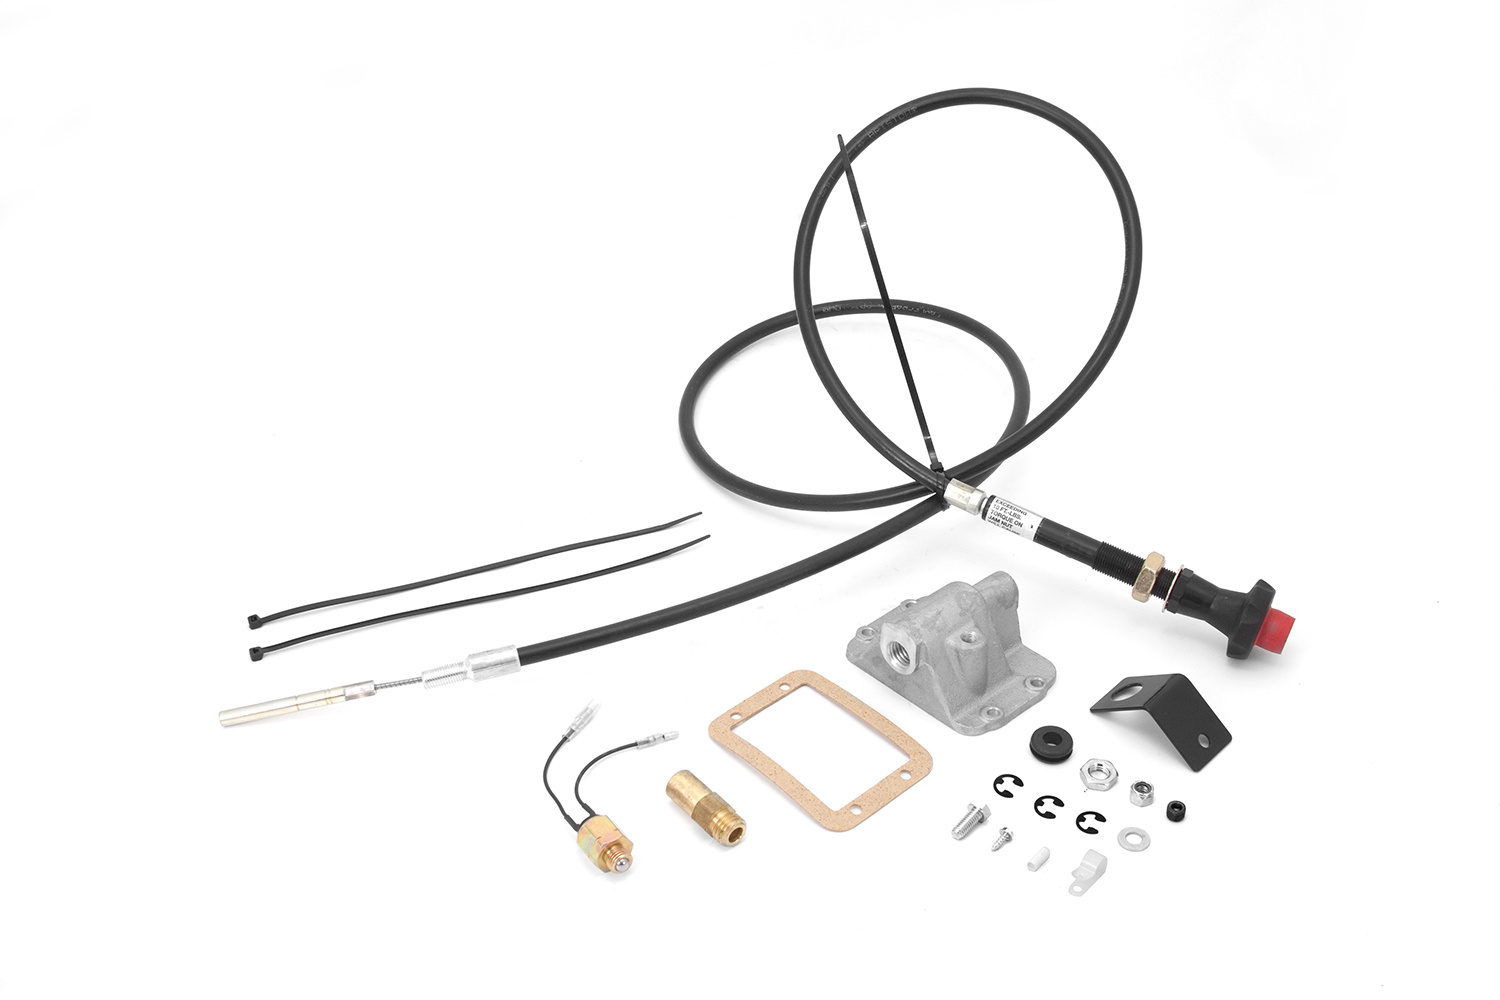 Alloy USA Alloy USA 450400 Differential Cable Lock Disconnect Kit Fits Ram 1500 Ram 2500